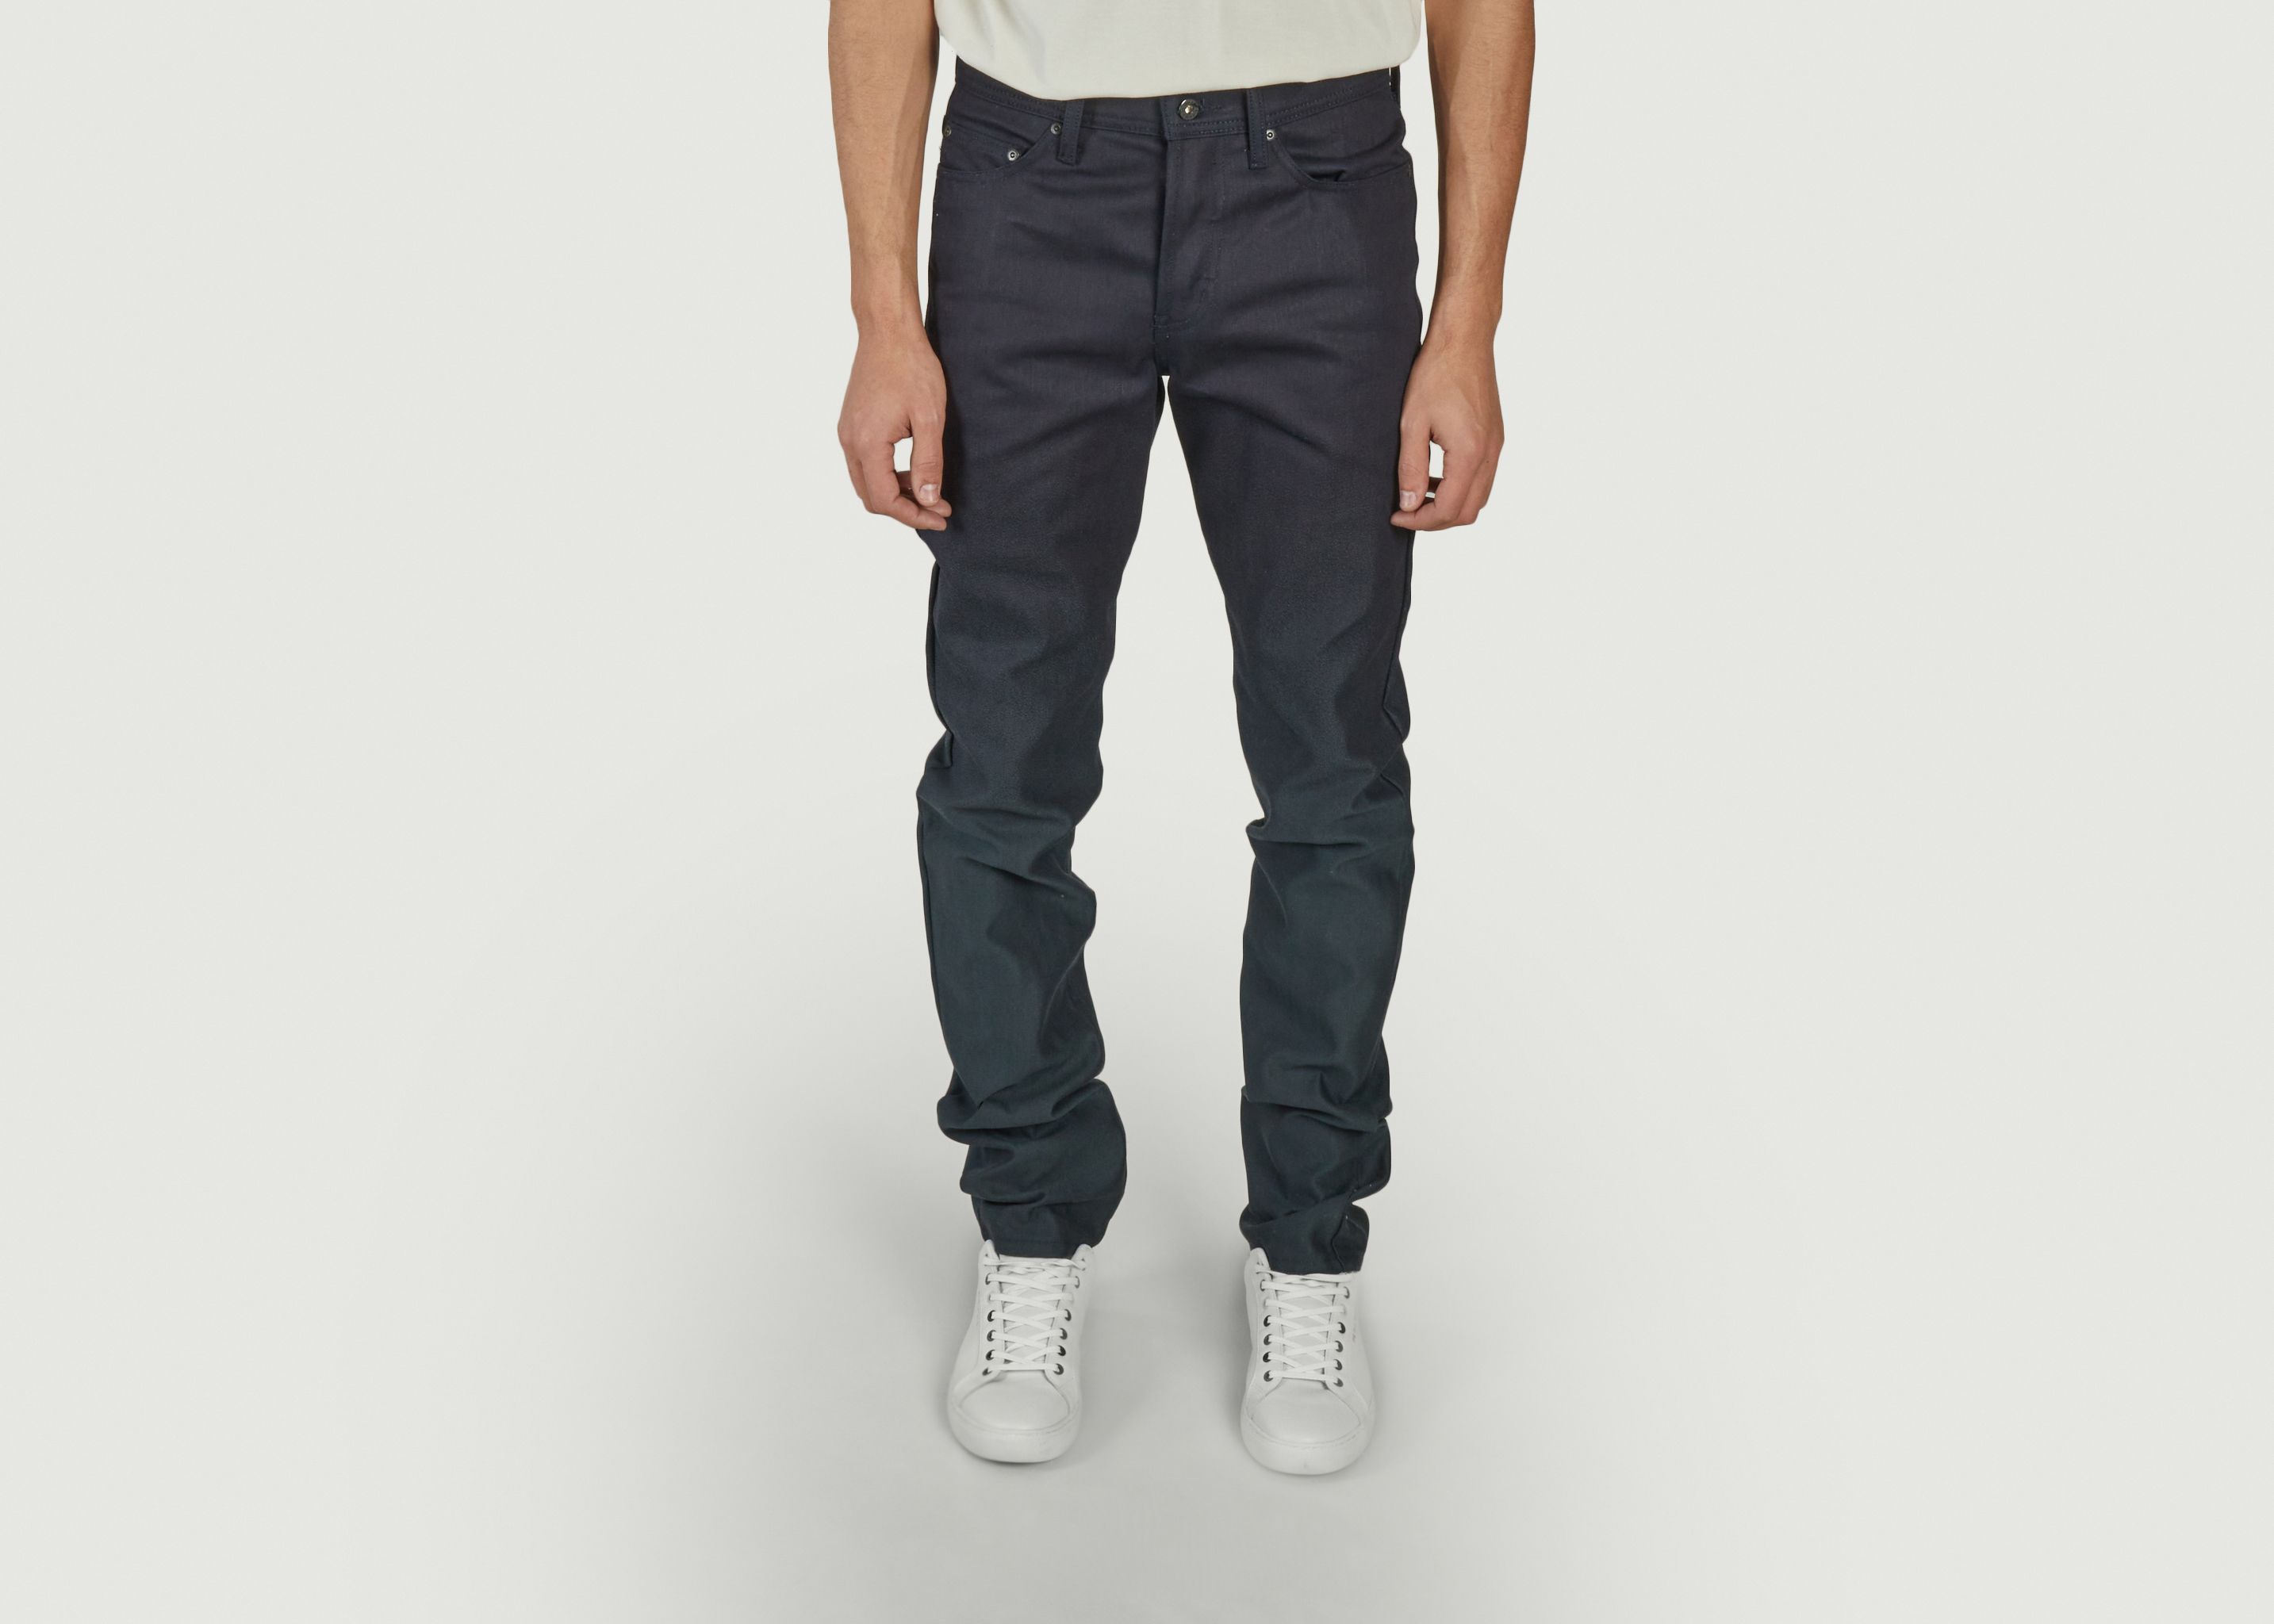 Jeans Weird Guy Gradient Denim - Naked and Famous